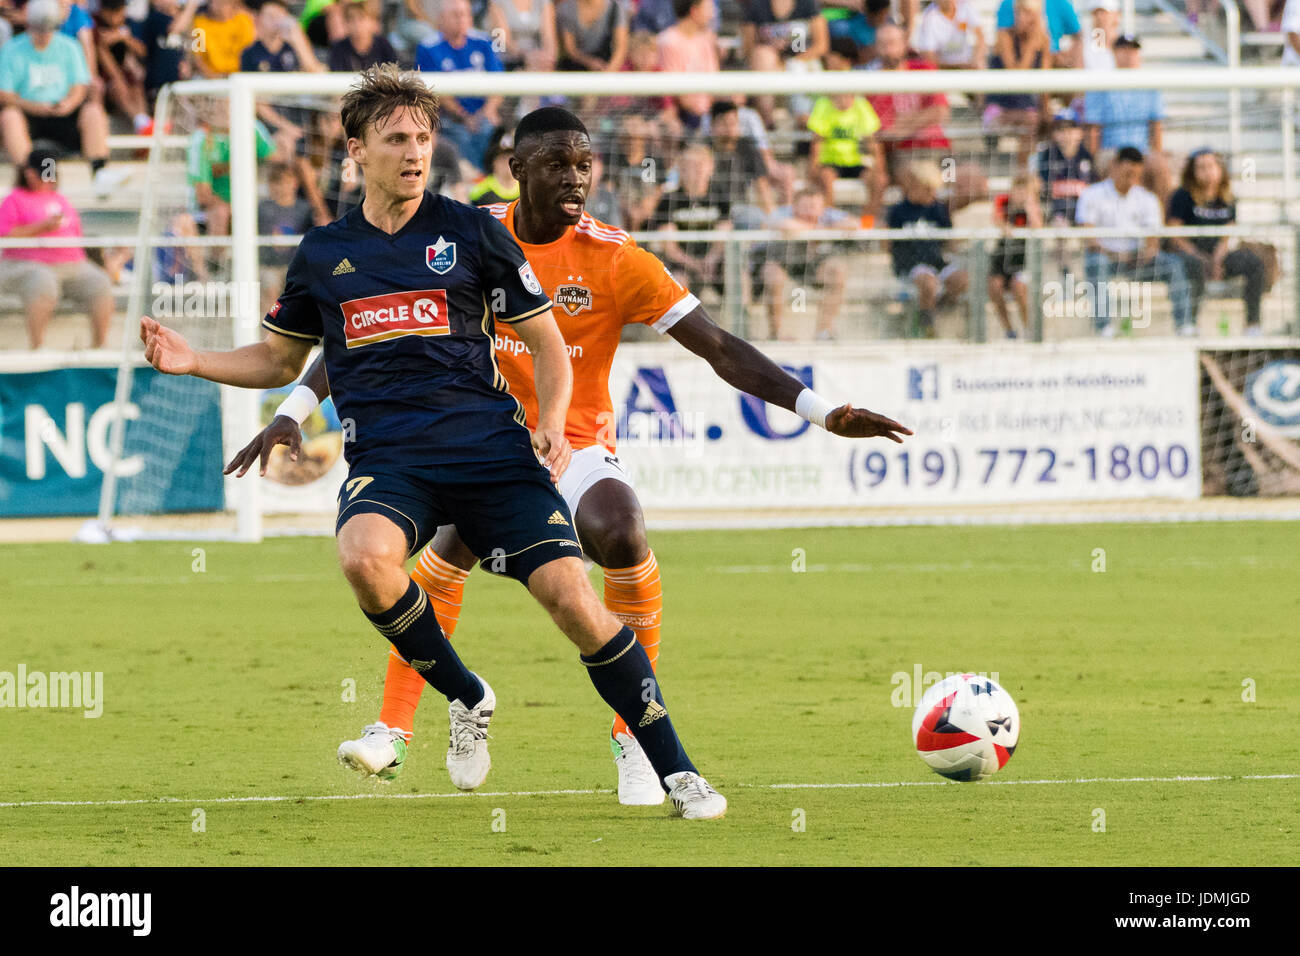 North Carolina FC forward Billy Schuler (17) and Houston Dynamo defender Jalil Anibaba (2) during a 2017 Lamar Hunt U.S. Open Cup match in Cary, NC. Stock Photo